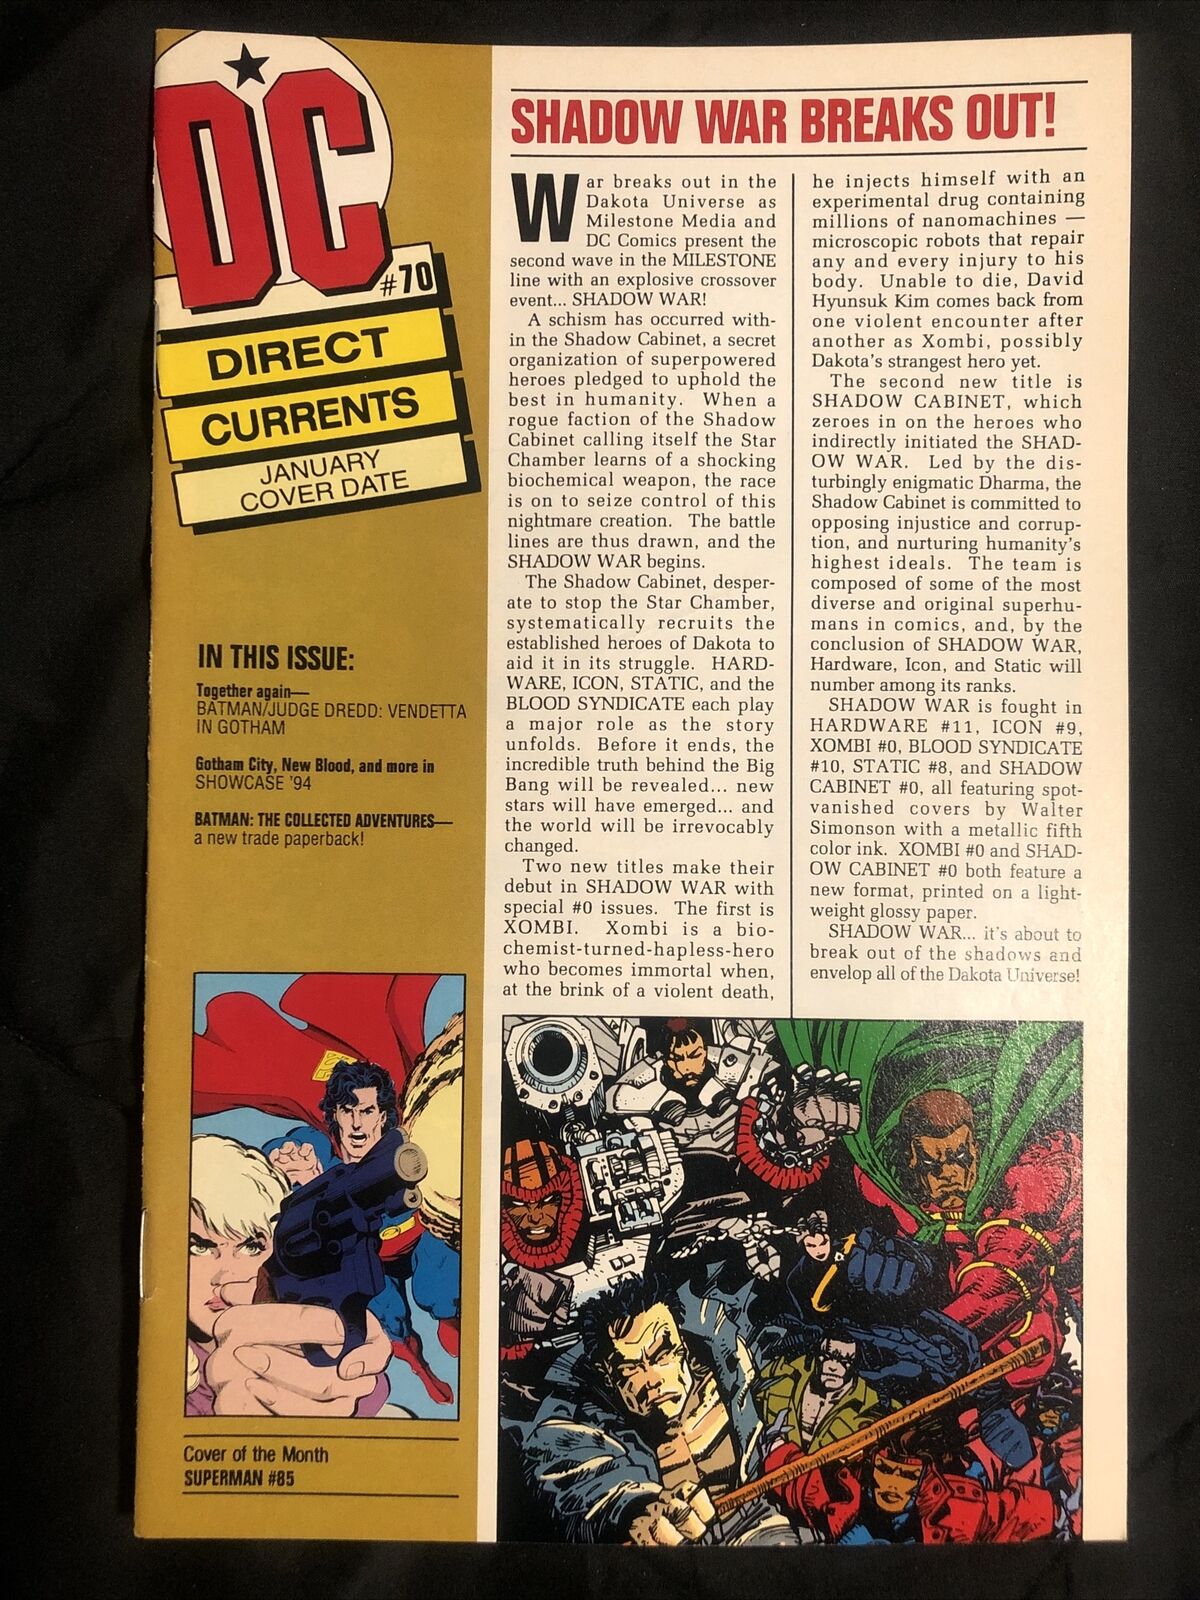 1994 DC Direct Currents #70, January Cover Date, DC Comics